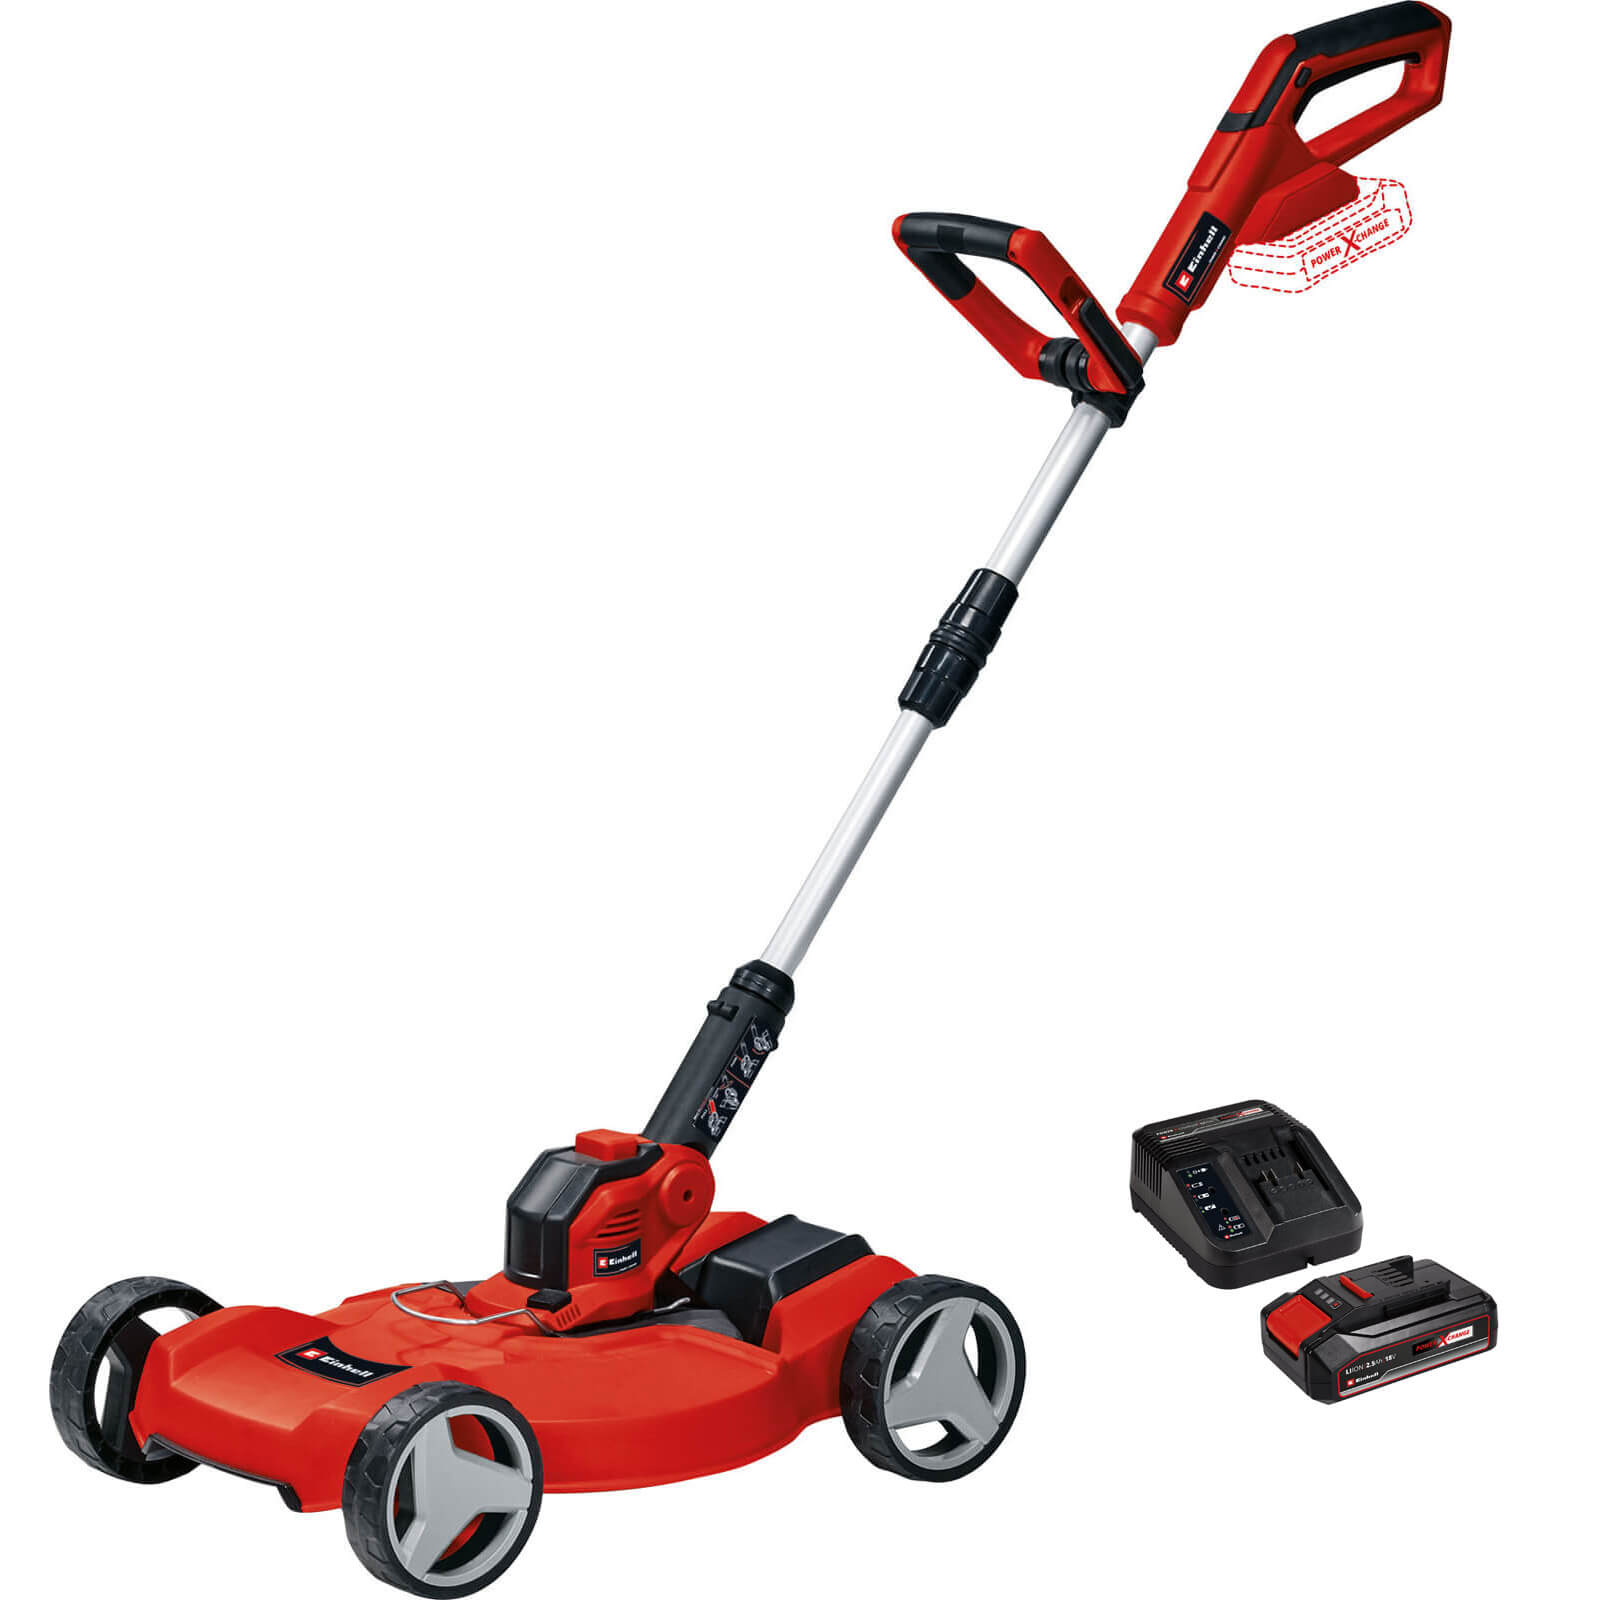 Image of Einhell GE-CT 18/28 Li TC 18v Cordless Grass Trimmer and Edger 280mm 1 x 2.5ah Li-ion Charger